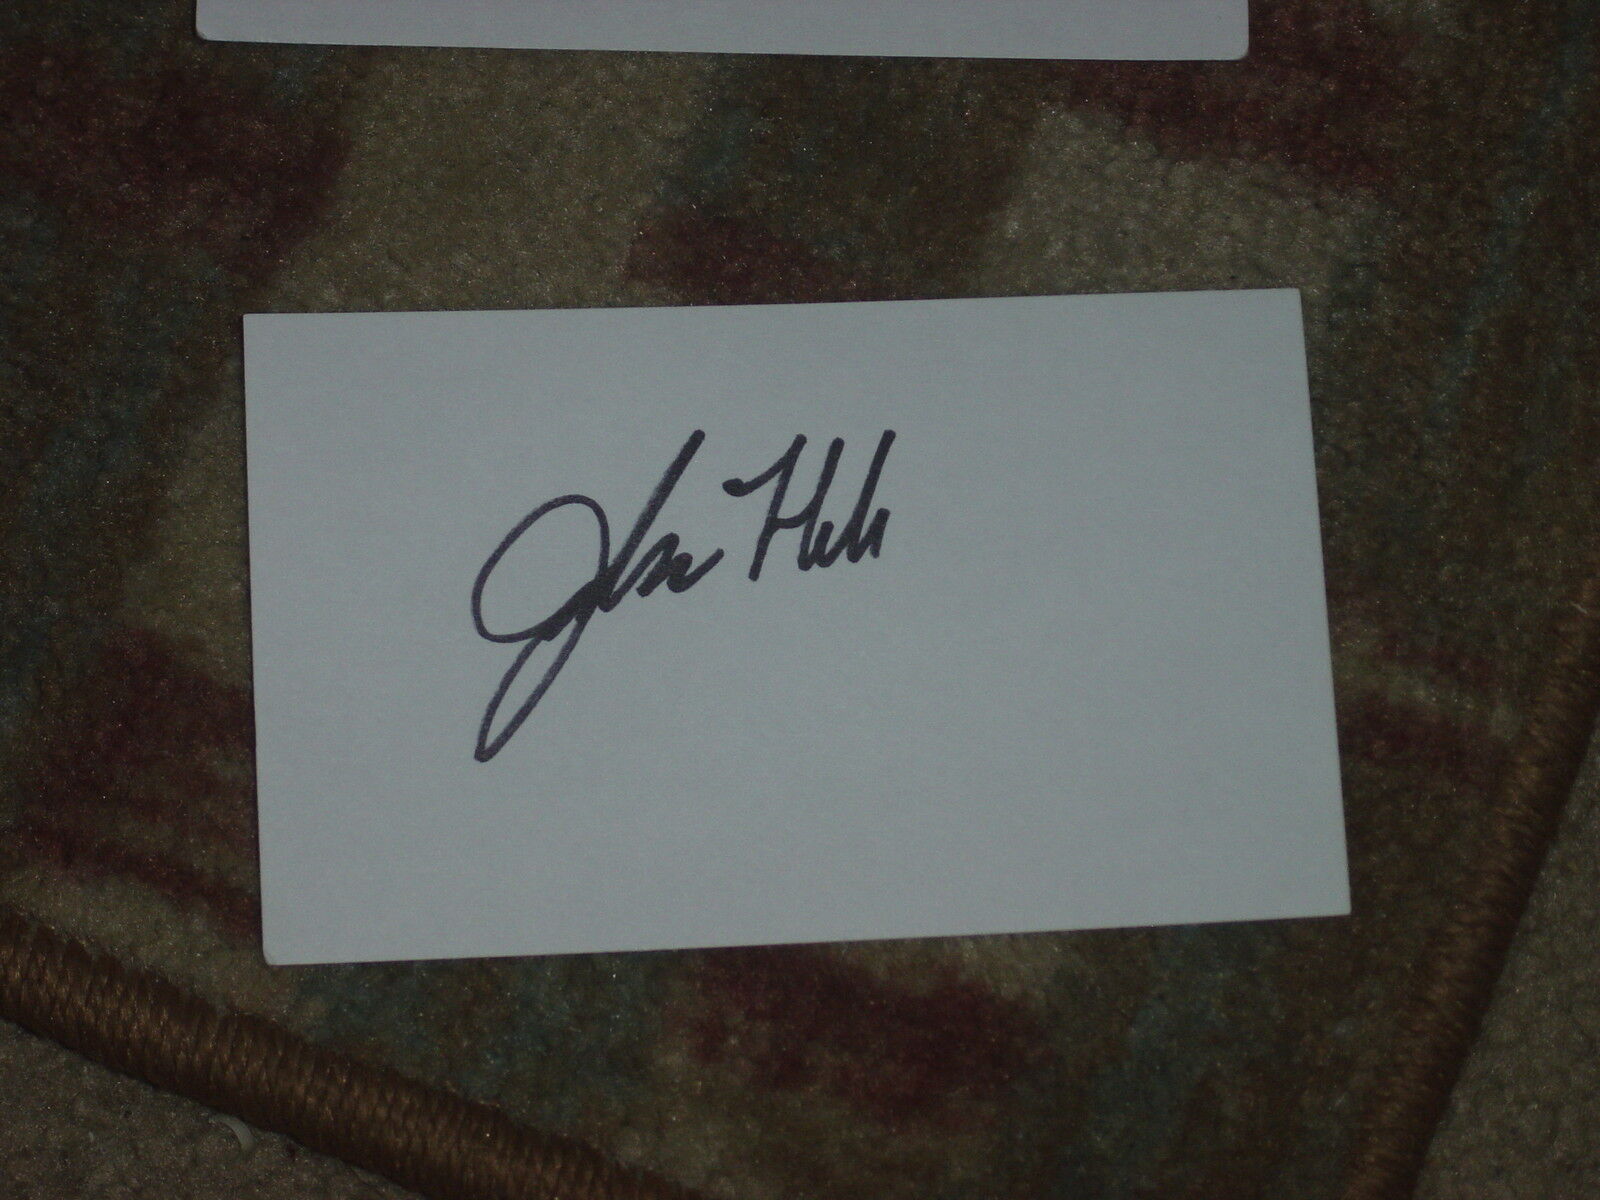 John Huh Golfer Signed 3x5 Translated specialty shop Card index